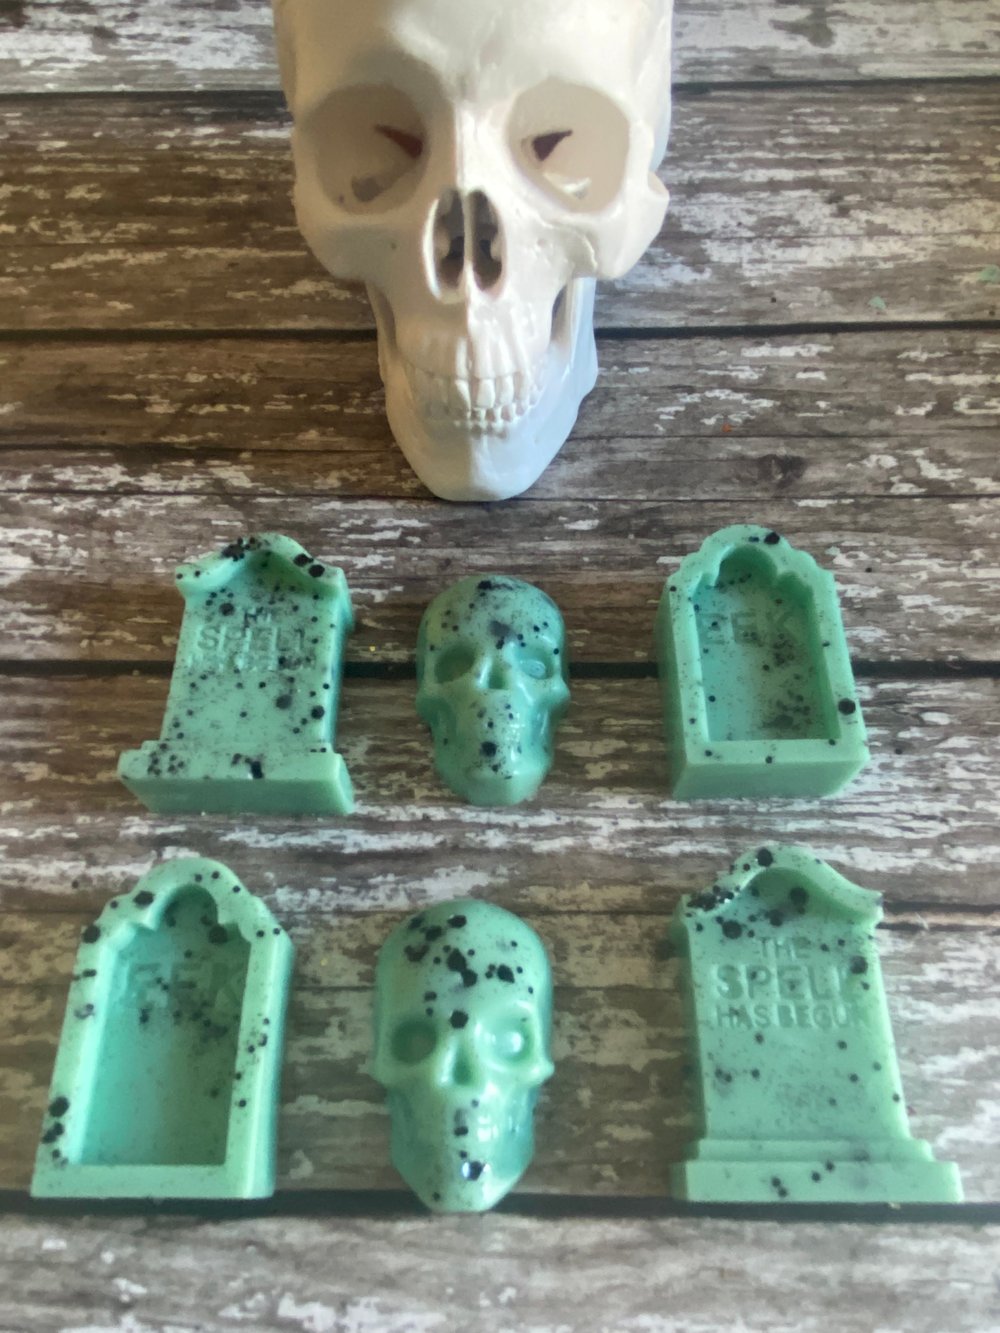 Deadly Margarita Wax Melts (pack of 3)